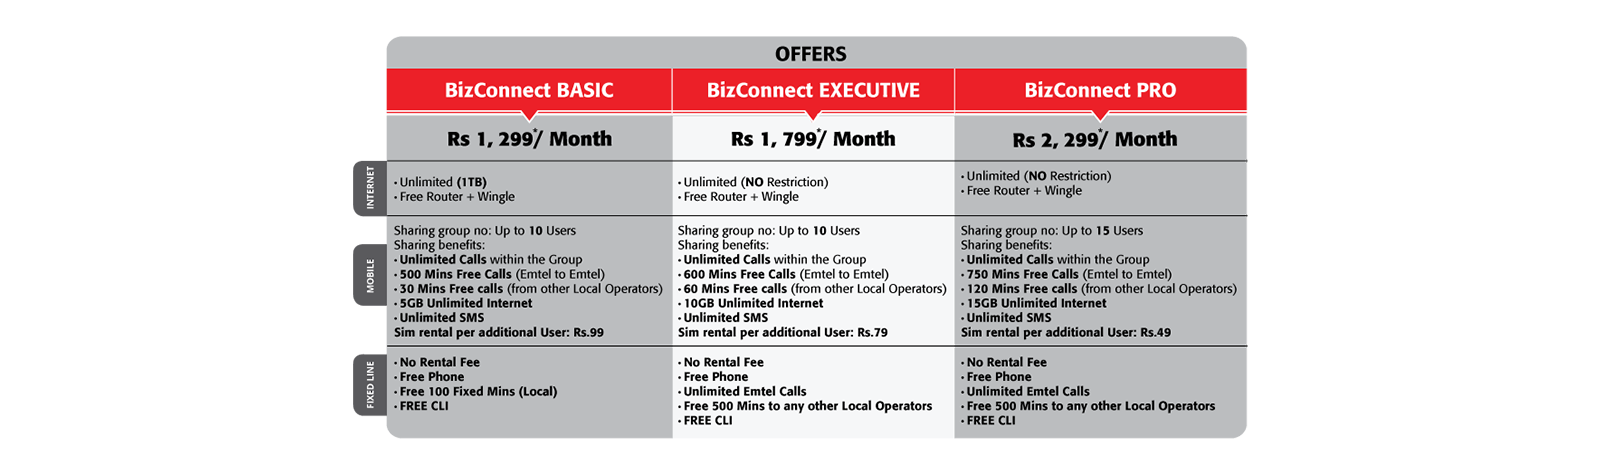 bizconnect offers